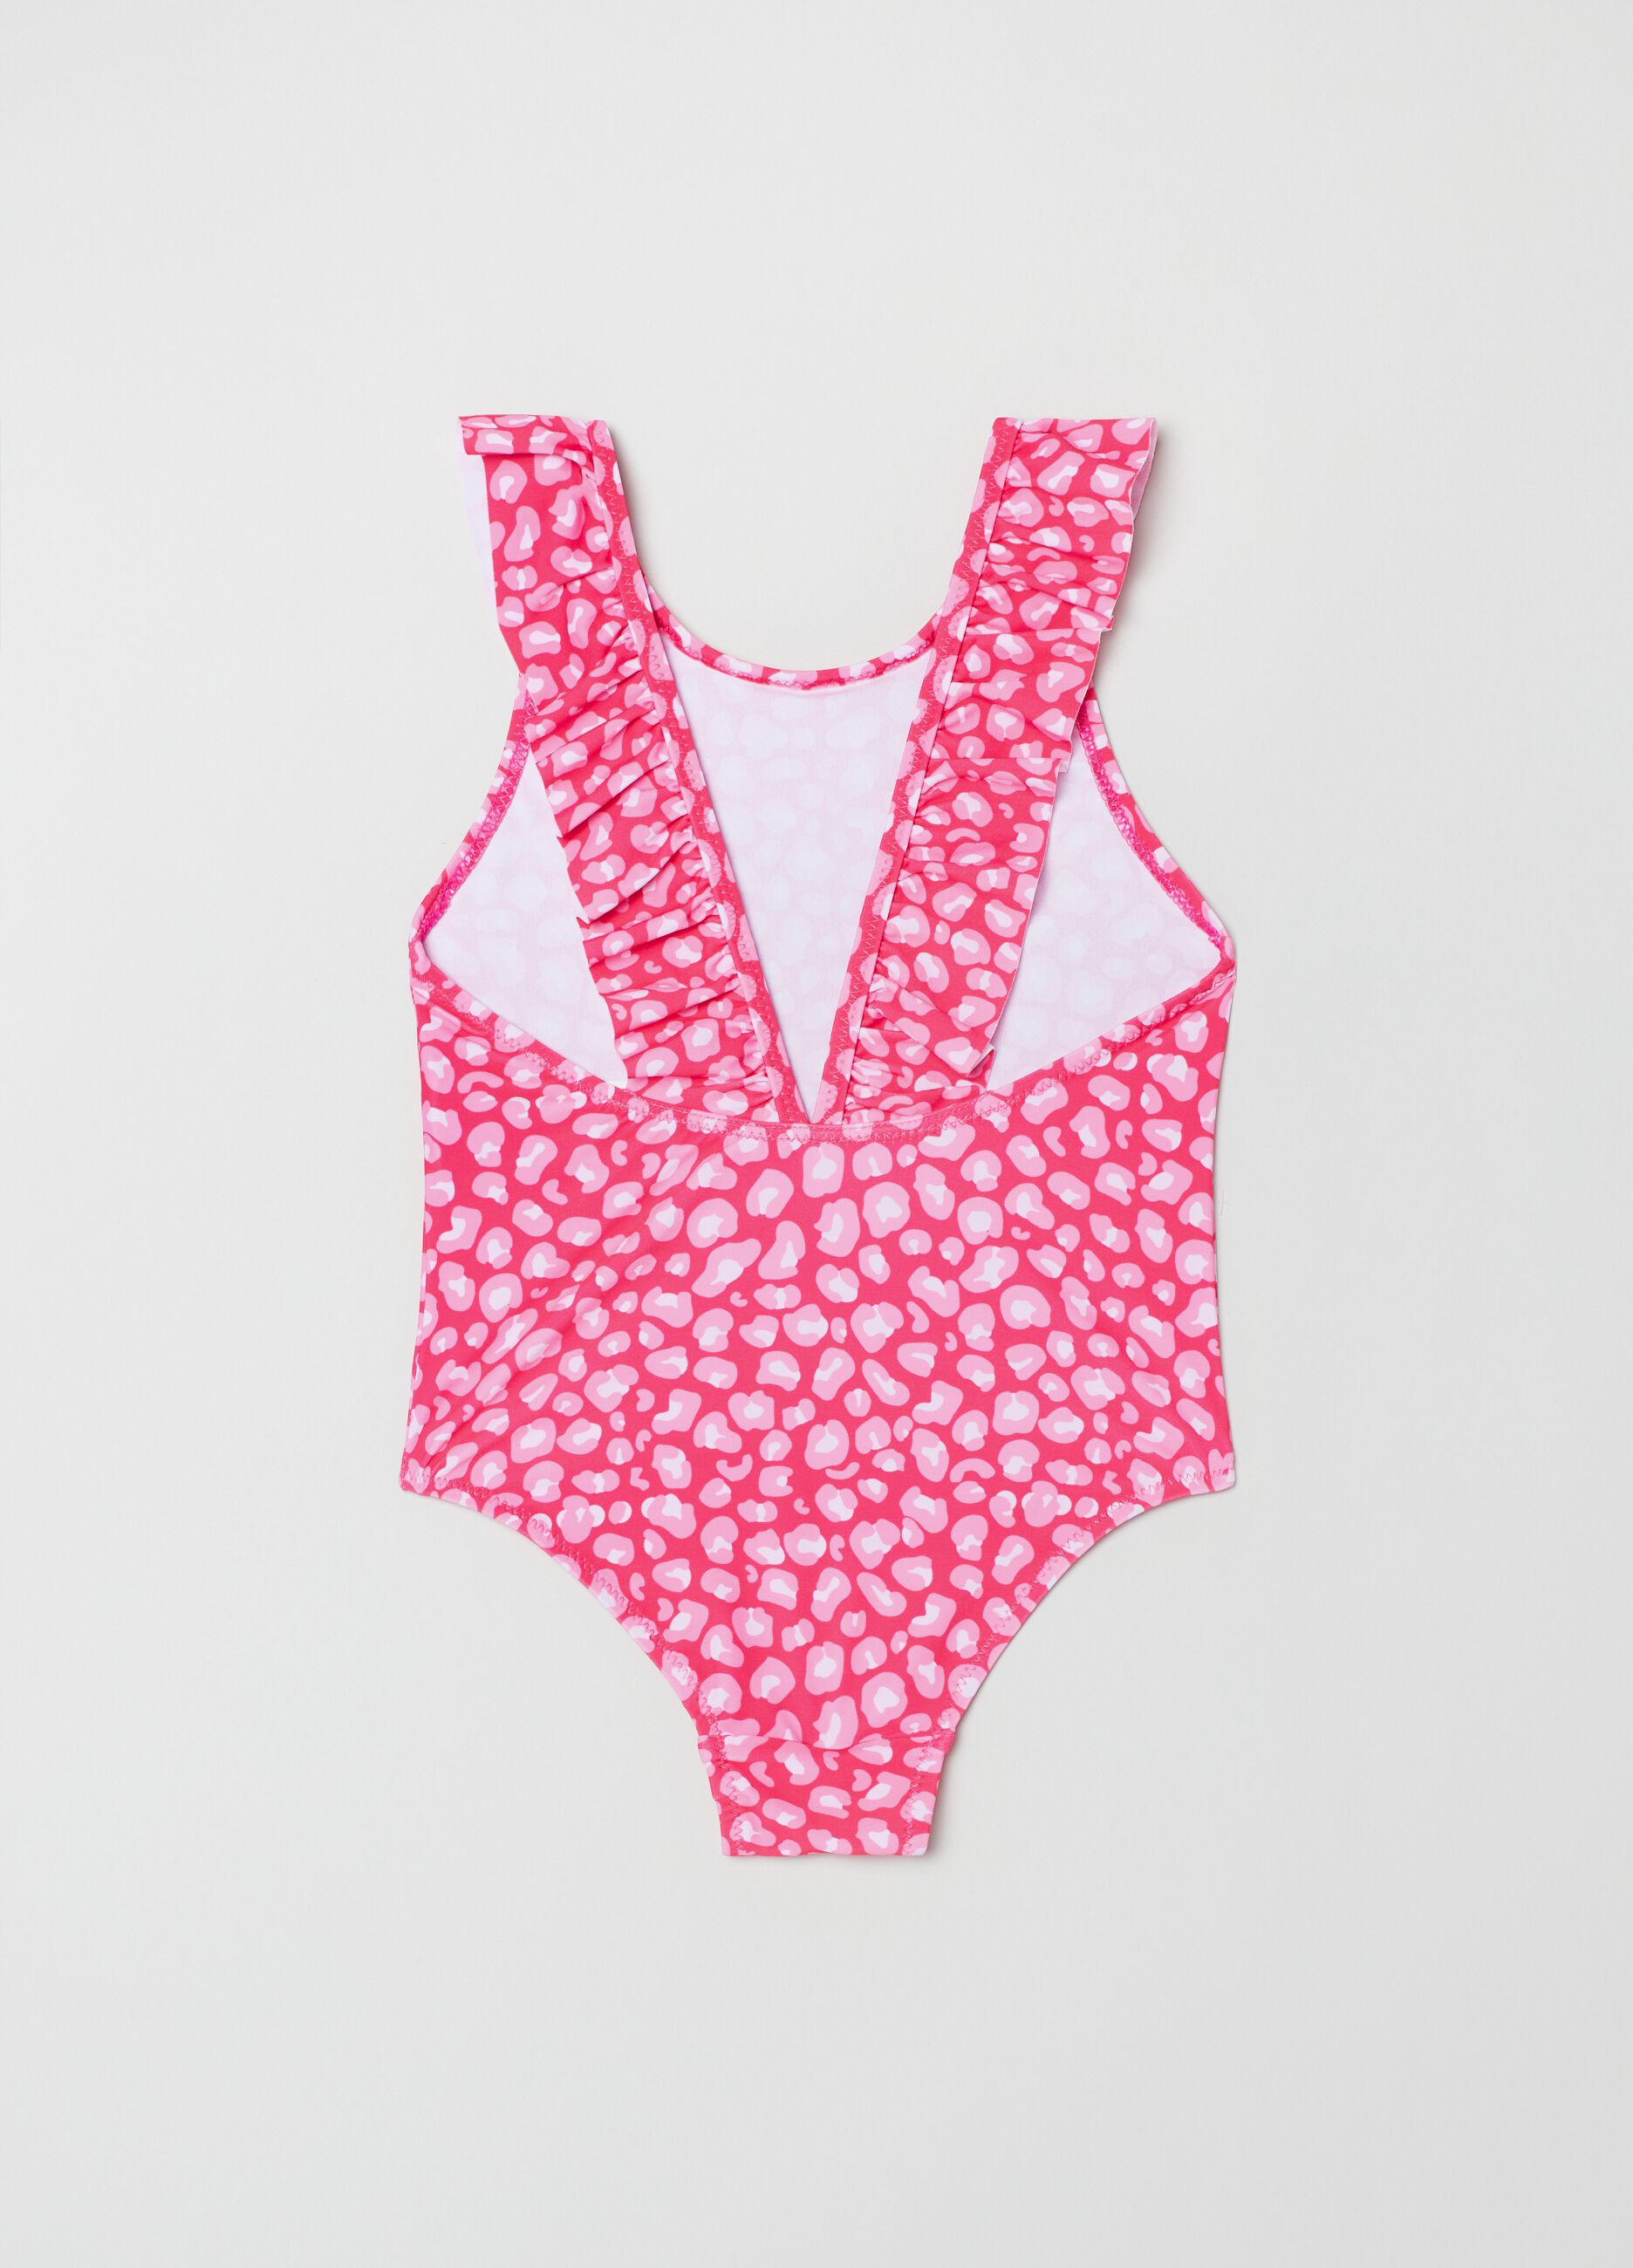 One-piece swimsuit with animal print pattern